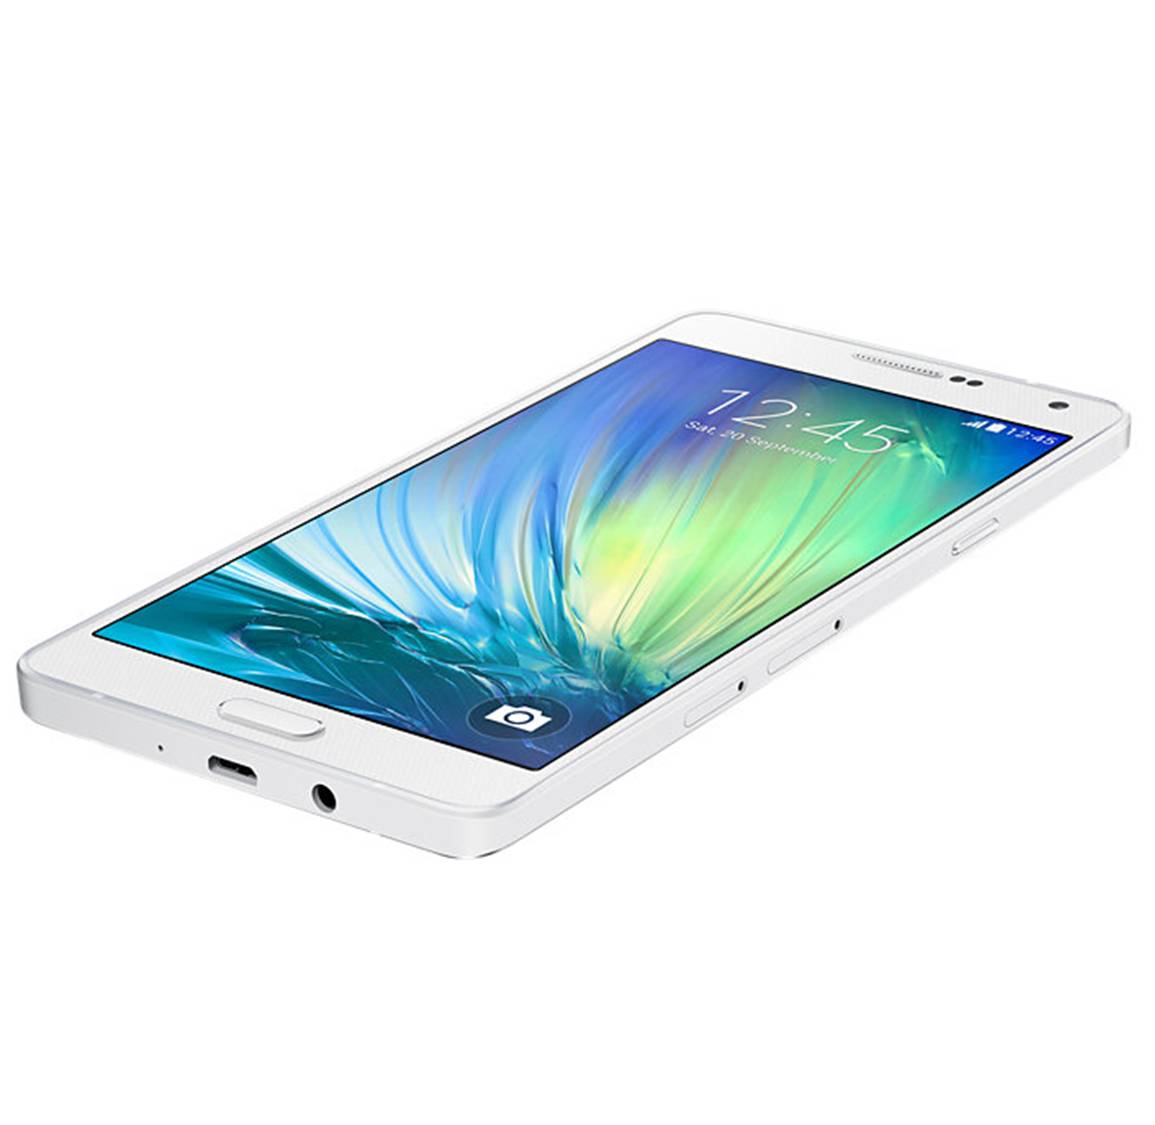 SAMSUNG Galaxy A7 - Full Specifications - MobileDevices.com.pk